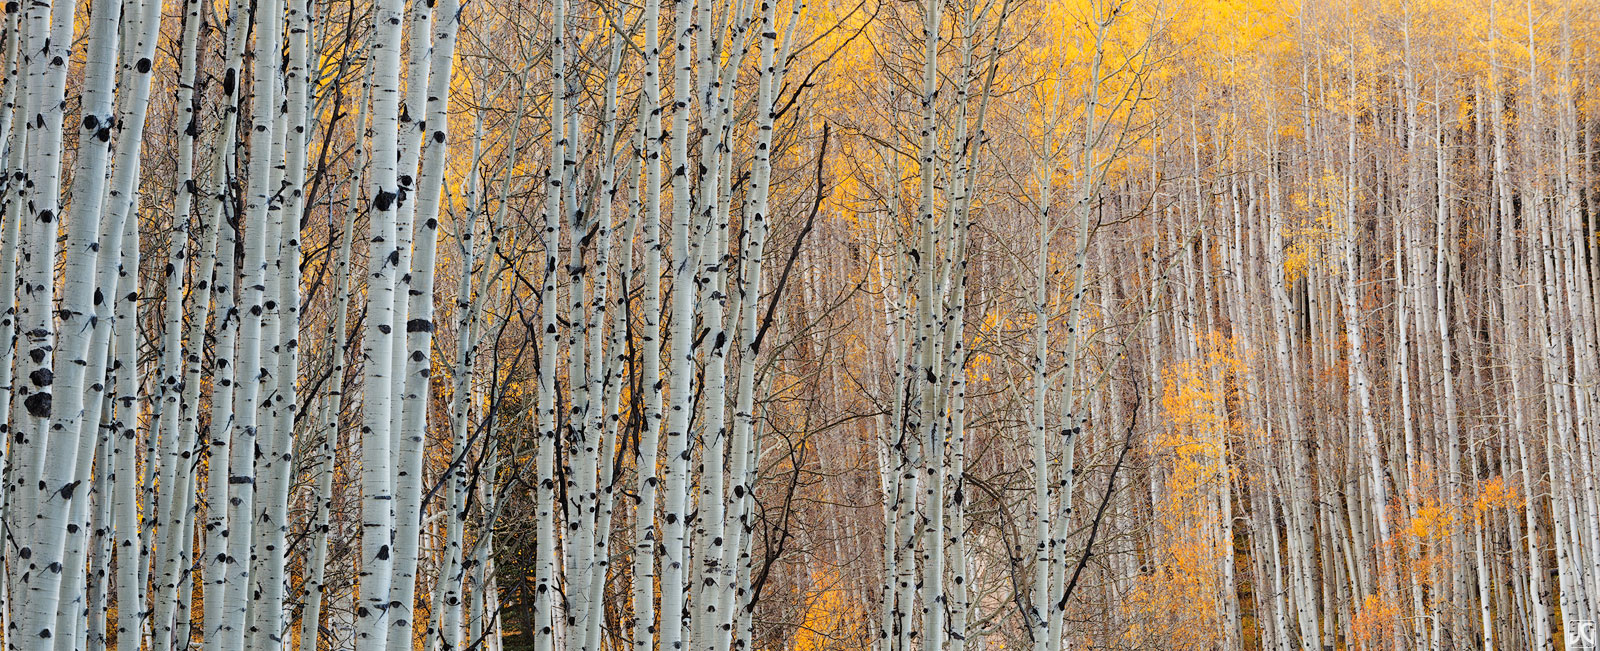 A gorgeous forest of aspen in the middle of autumn near the town of Telluride in the San Juan Mountains.